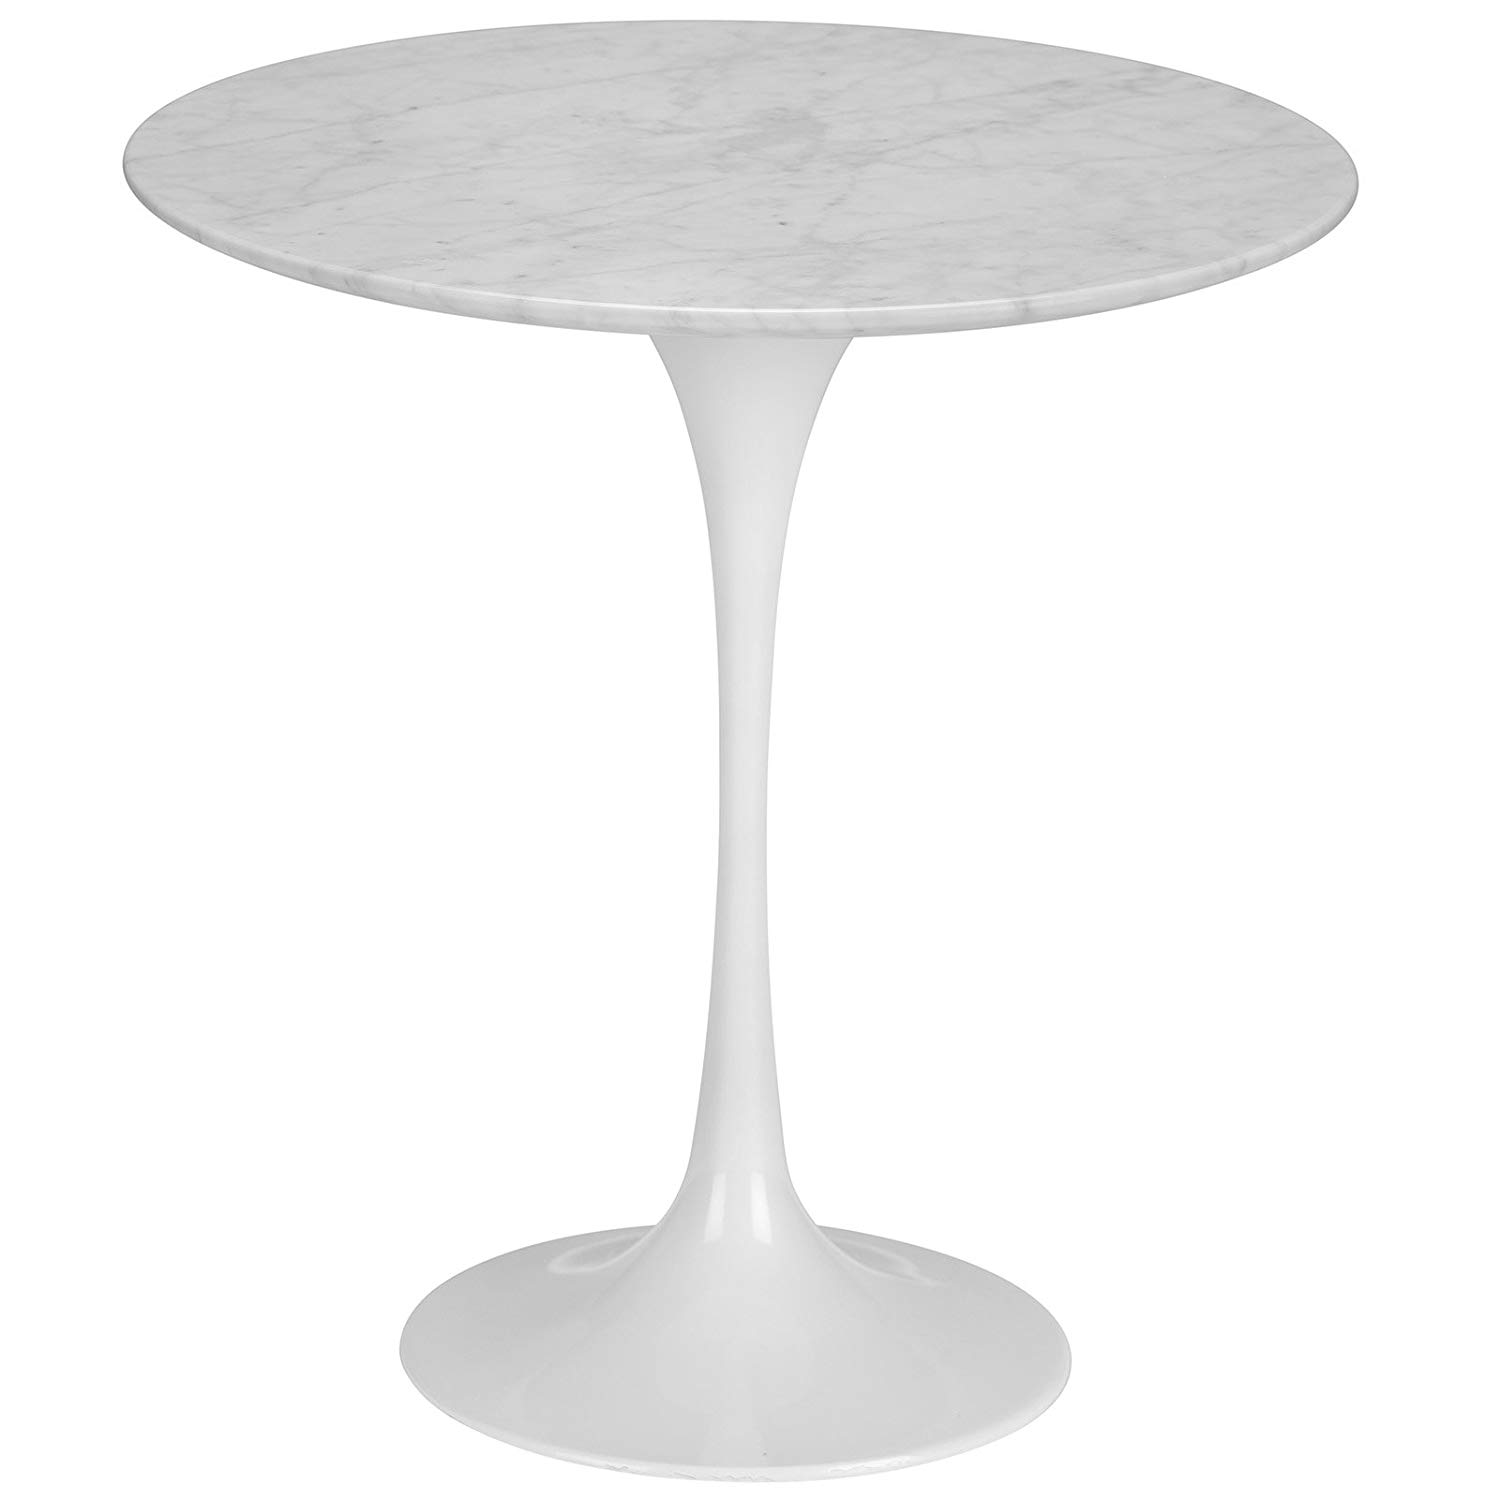 poly and bark daisy marble side table white base zfjqel signy drum accent with top kitchen dining blue striped patio umbrella dinner west elm leather sofa small dresser target